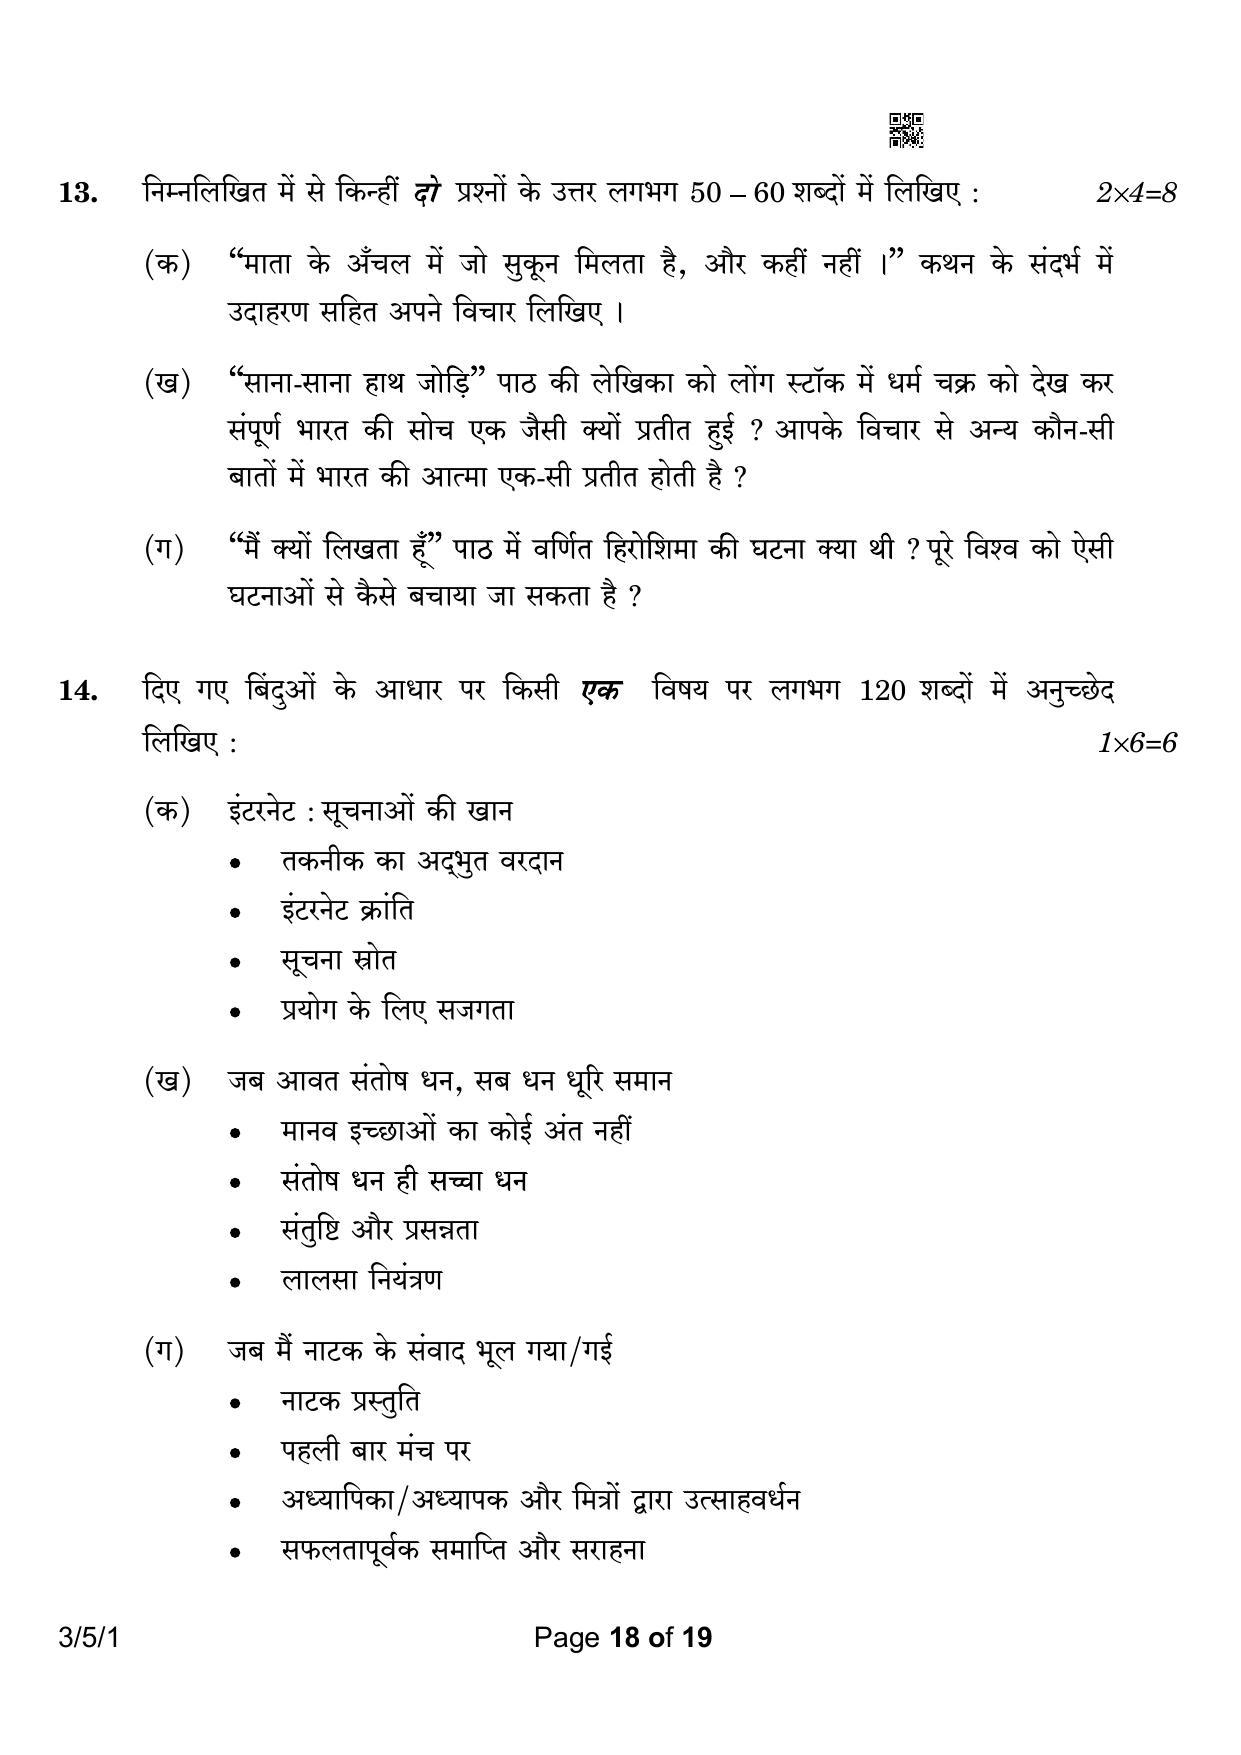 CBSE Class 10 3-5-1 Hindi A 2023 Question Paper - Page 18